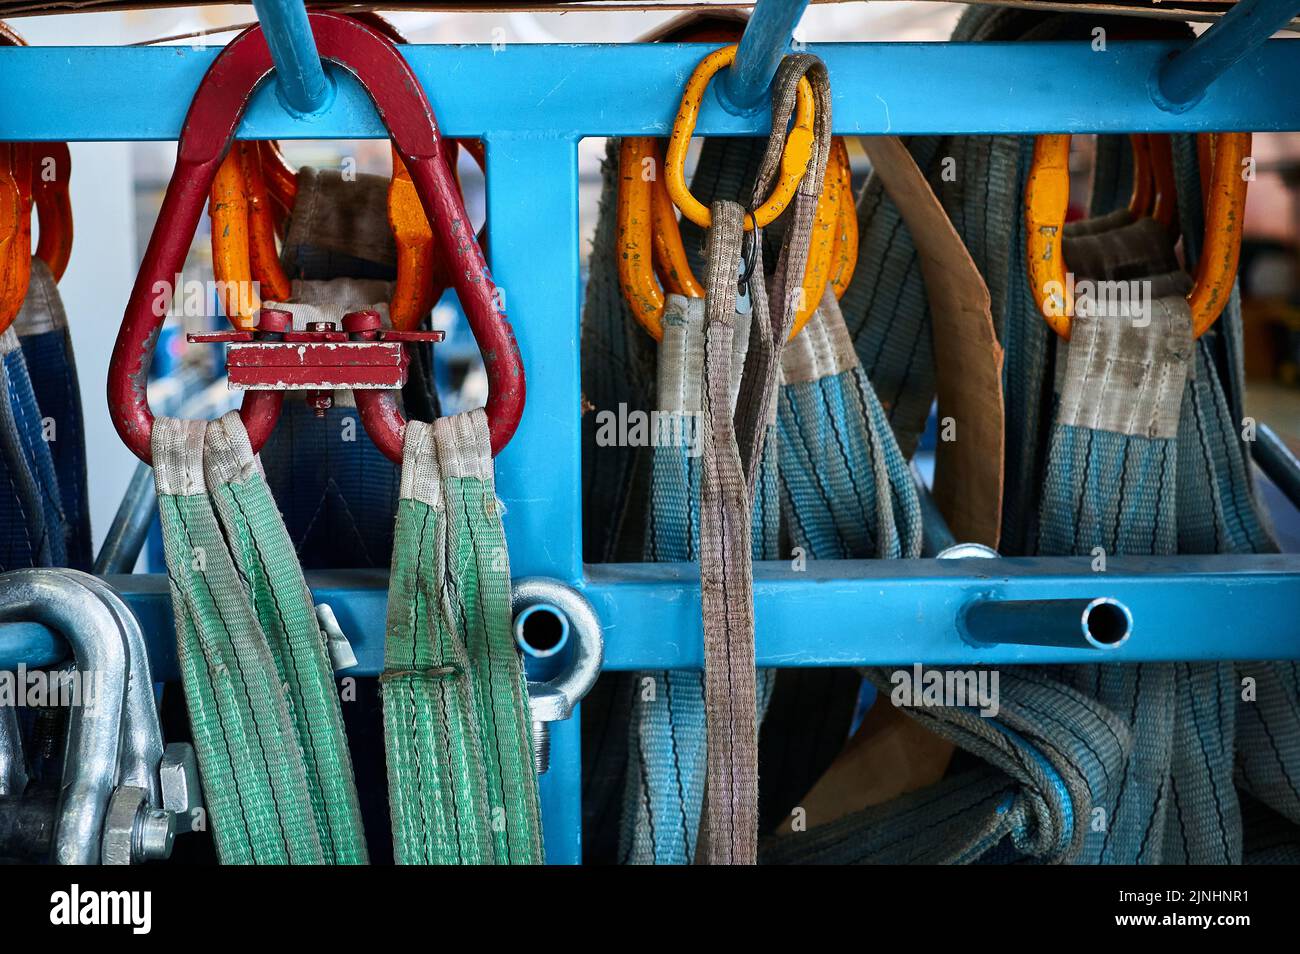 Rigging equipment with strops hangs on rack in warehouse Stock Photo